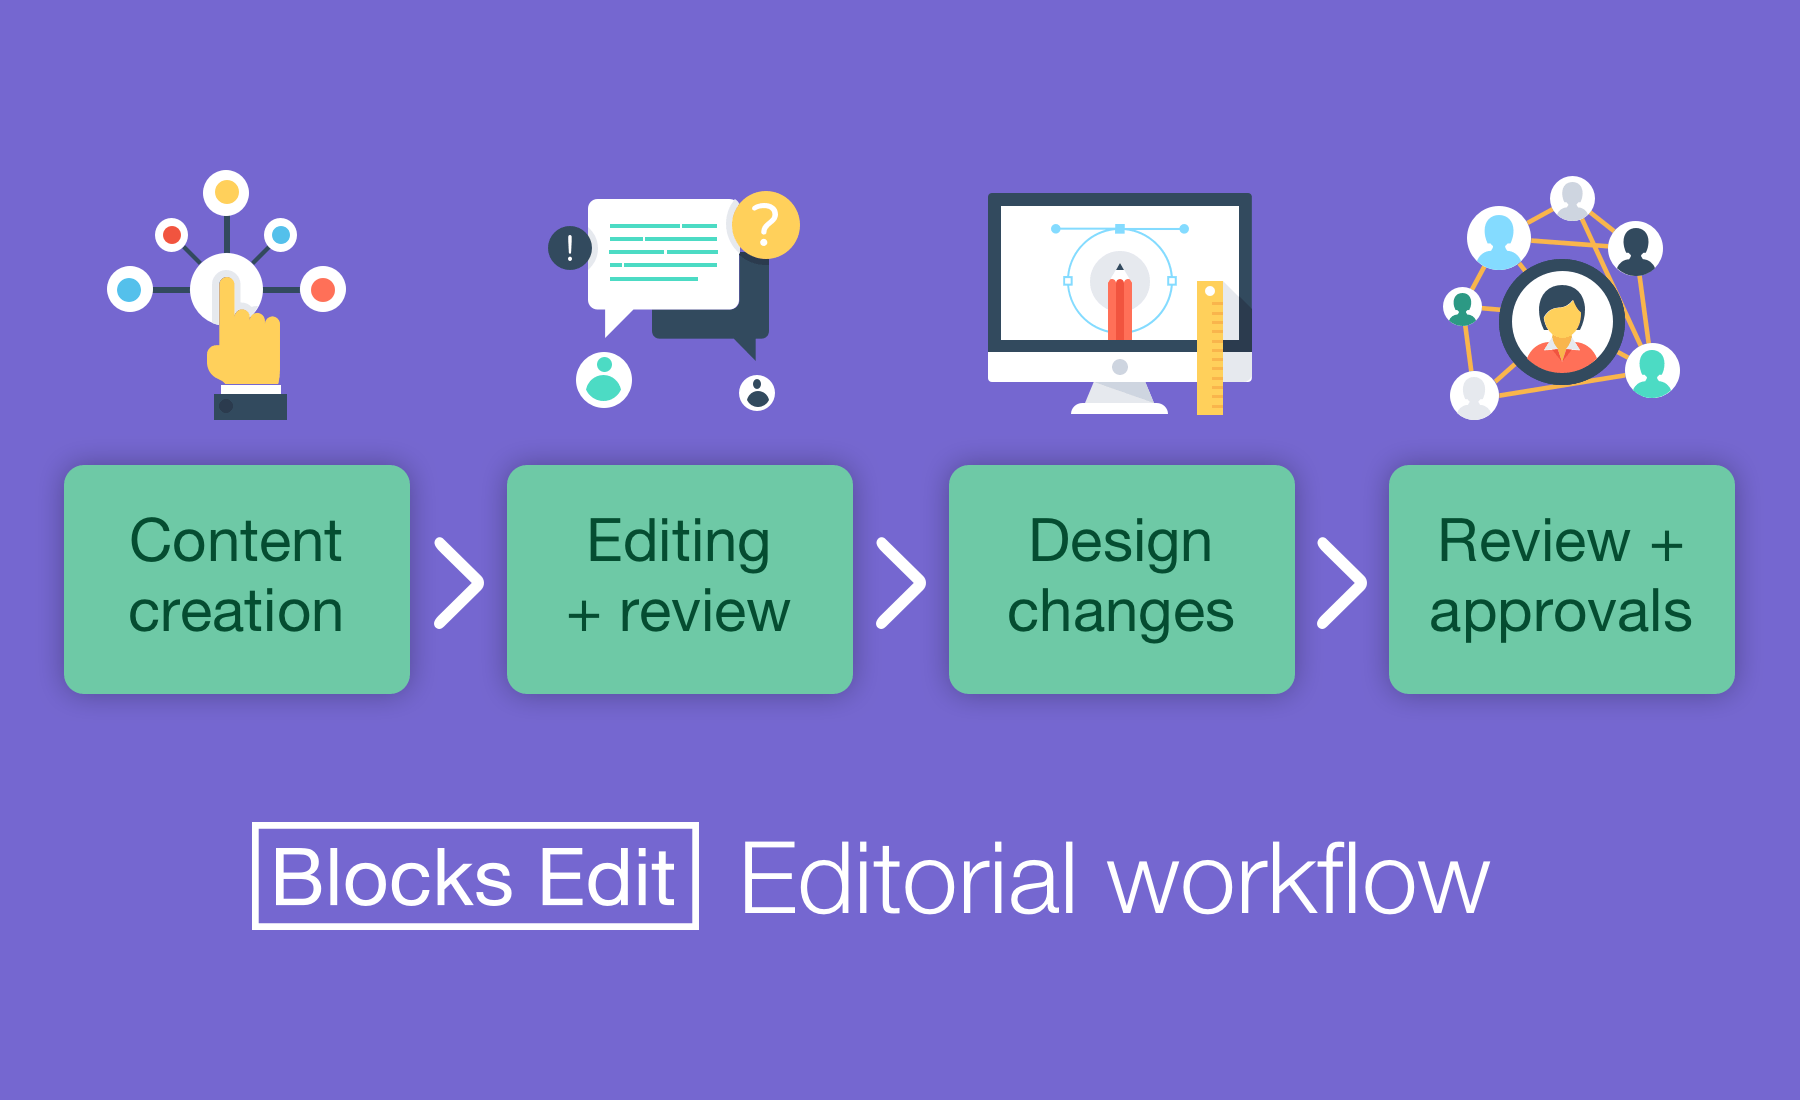 An illustration of the Blocks Edit editorial workflow: content creation, editing + review, design changes, review + approvals.